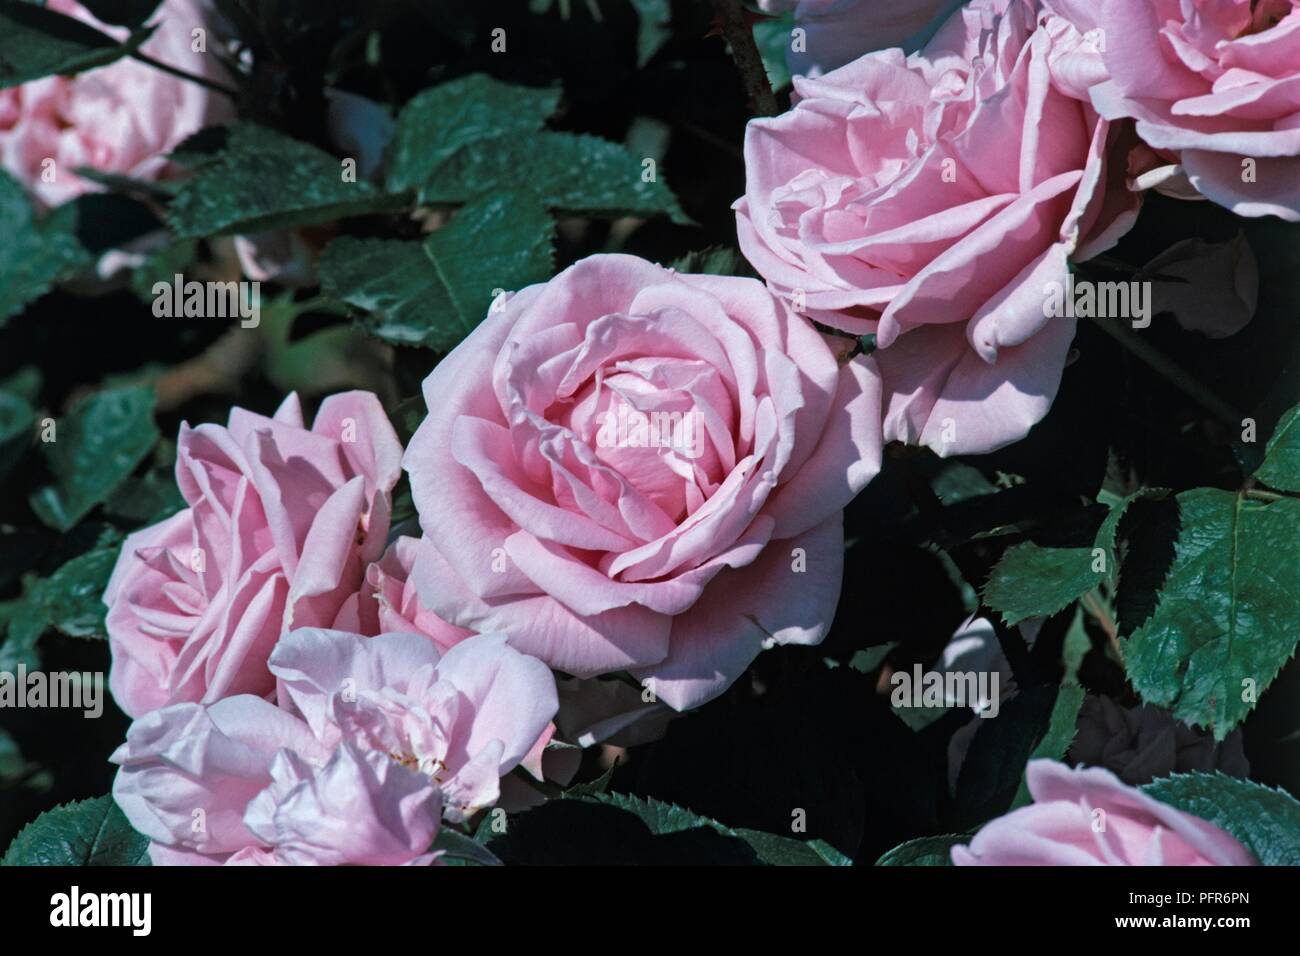 Flowers and leaves from Rosa 'Conrad Ferdinand Meyer', close-up Stock Photo  - Alamy